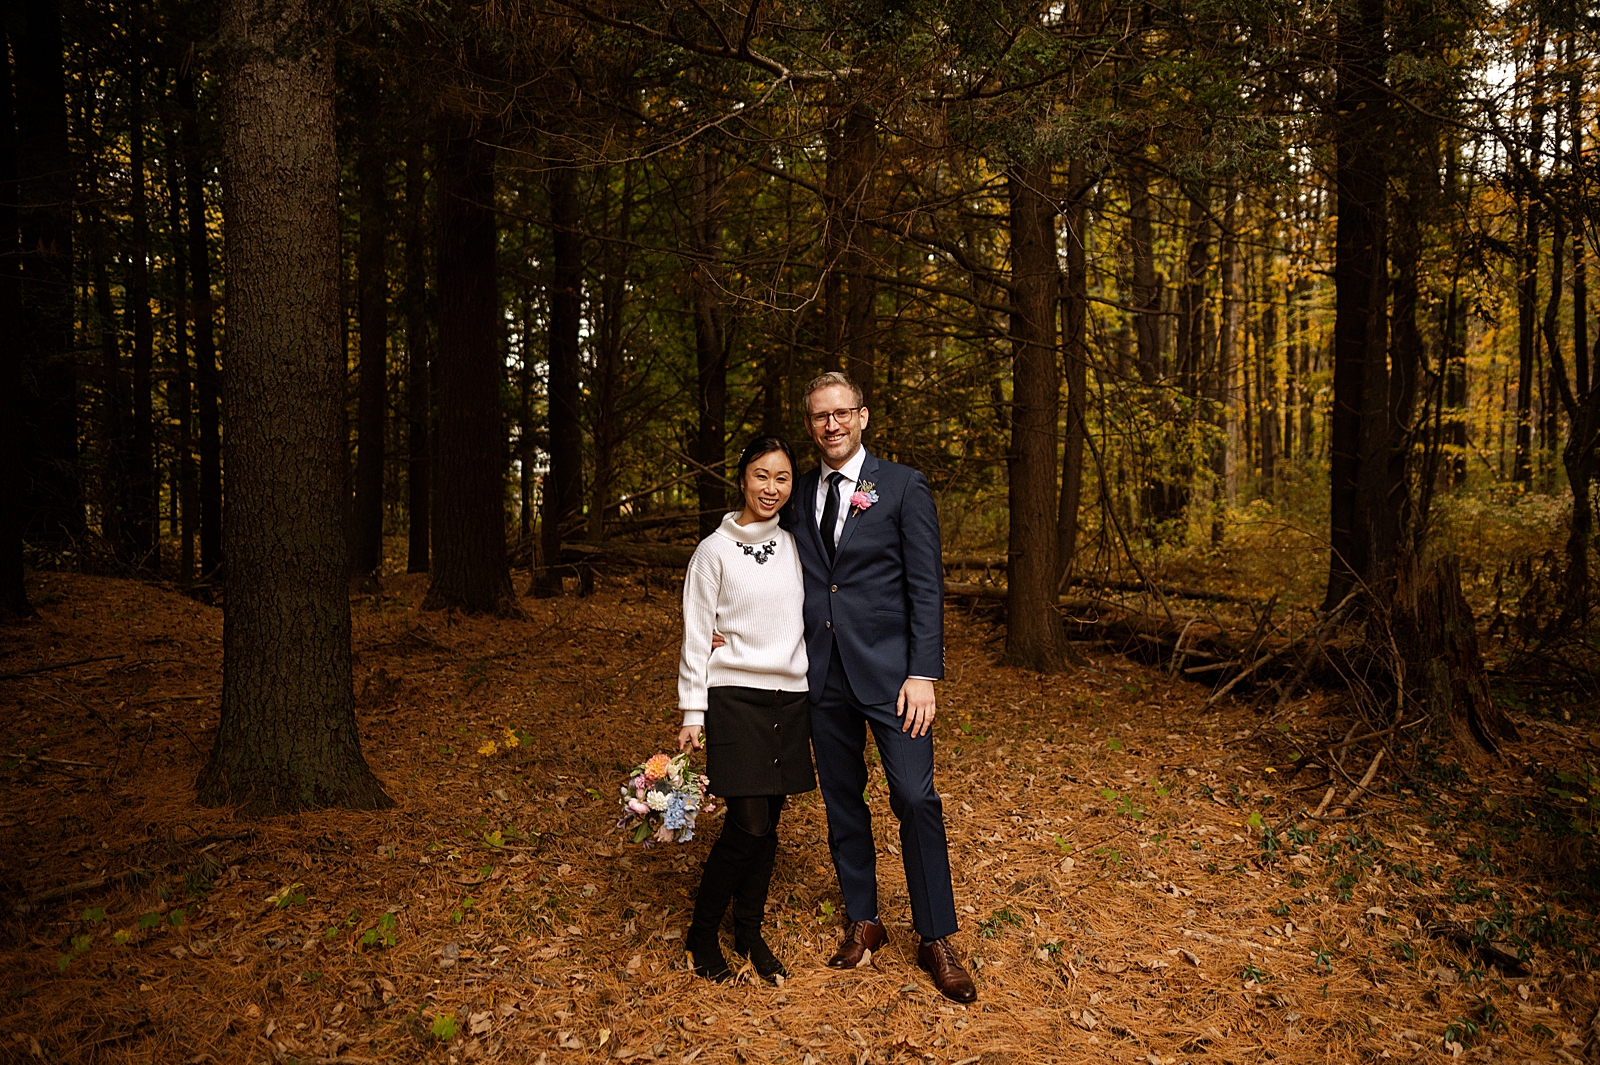 Bride and Groom standing next to each other for formal portrait in autumn forest